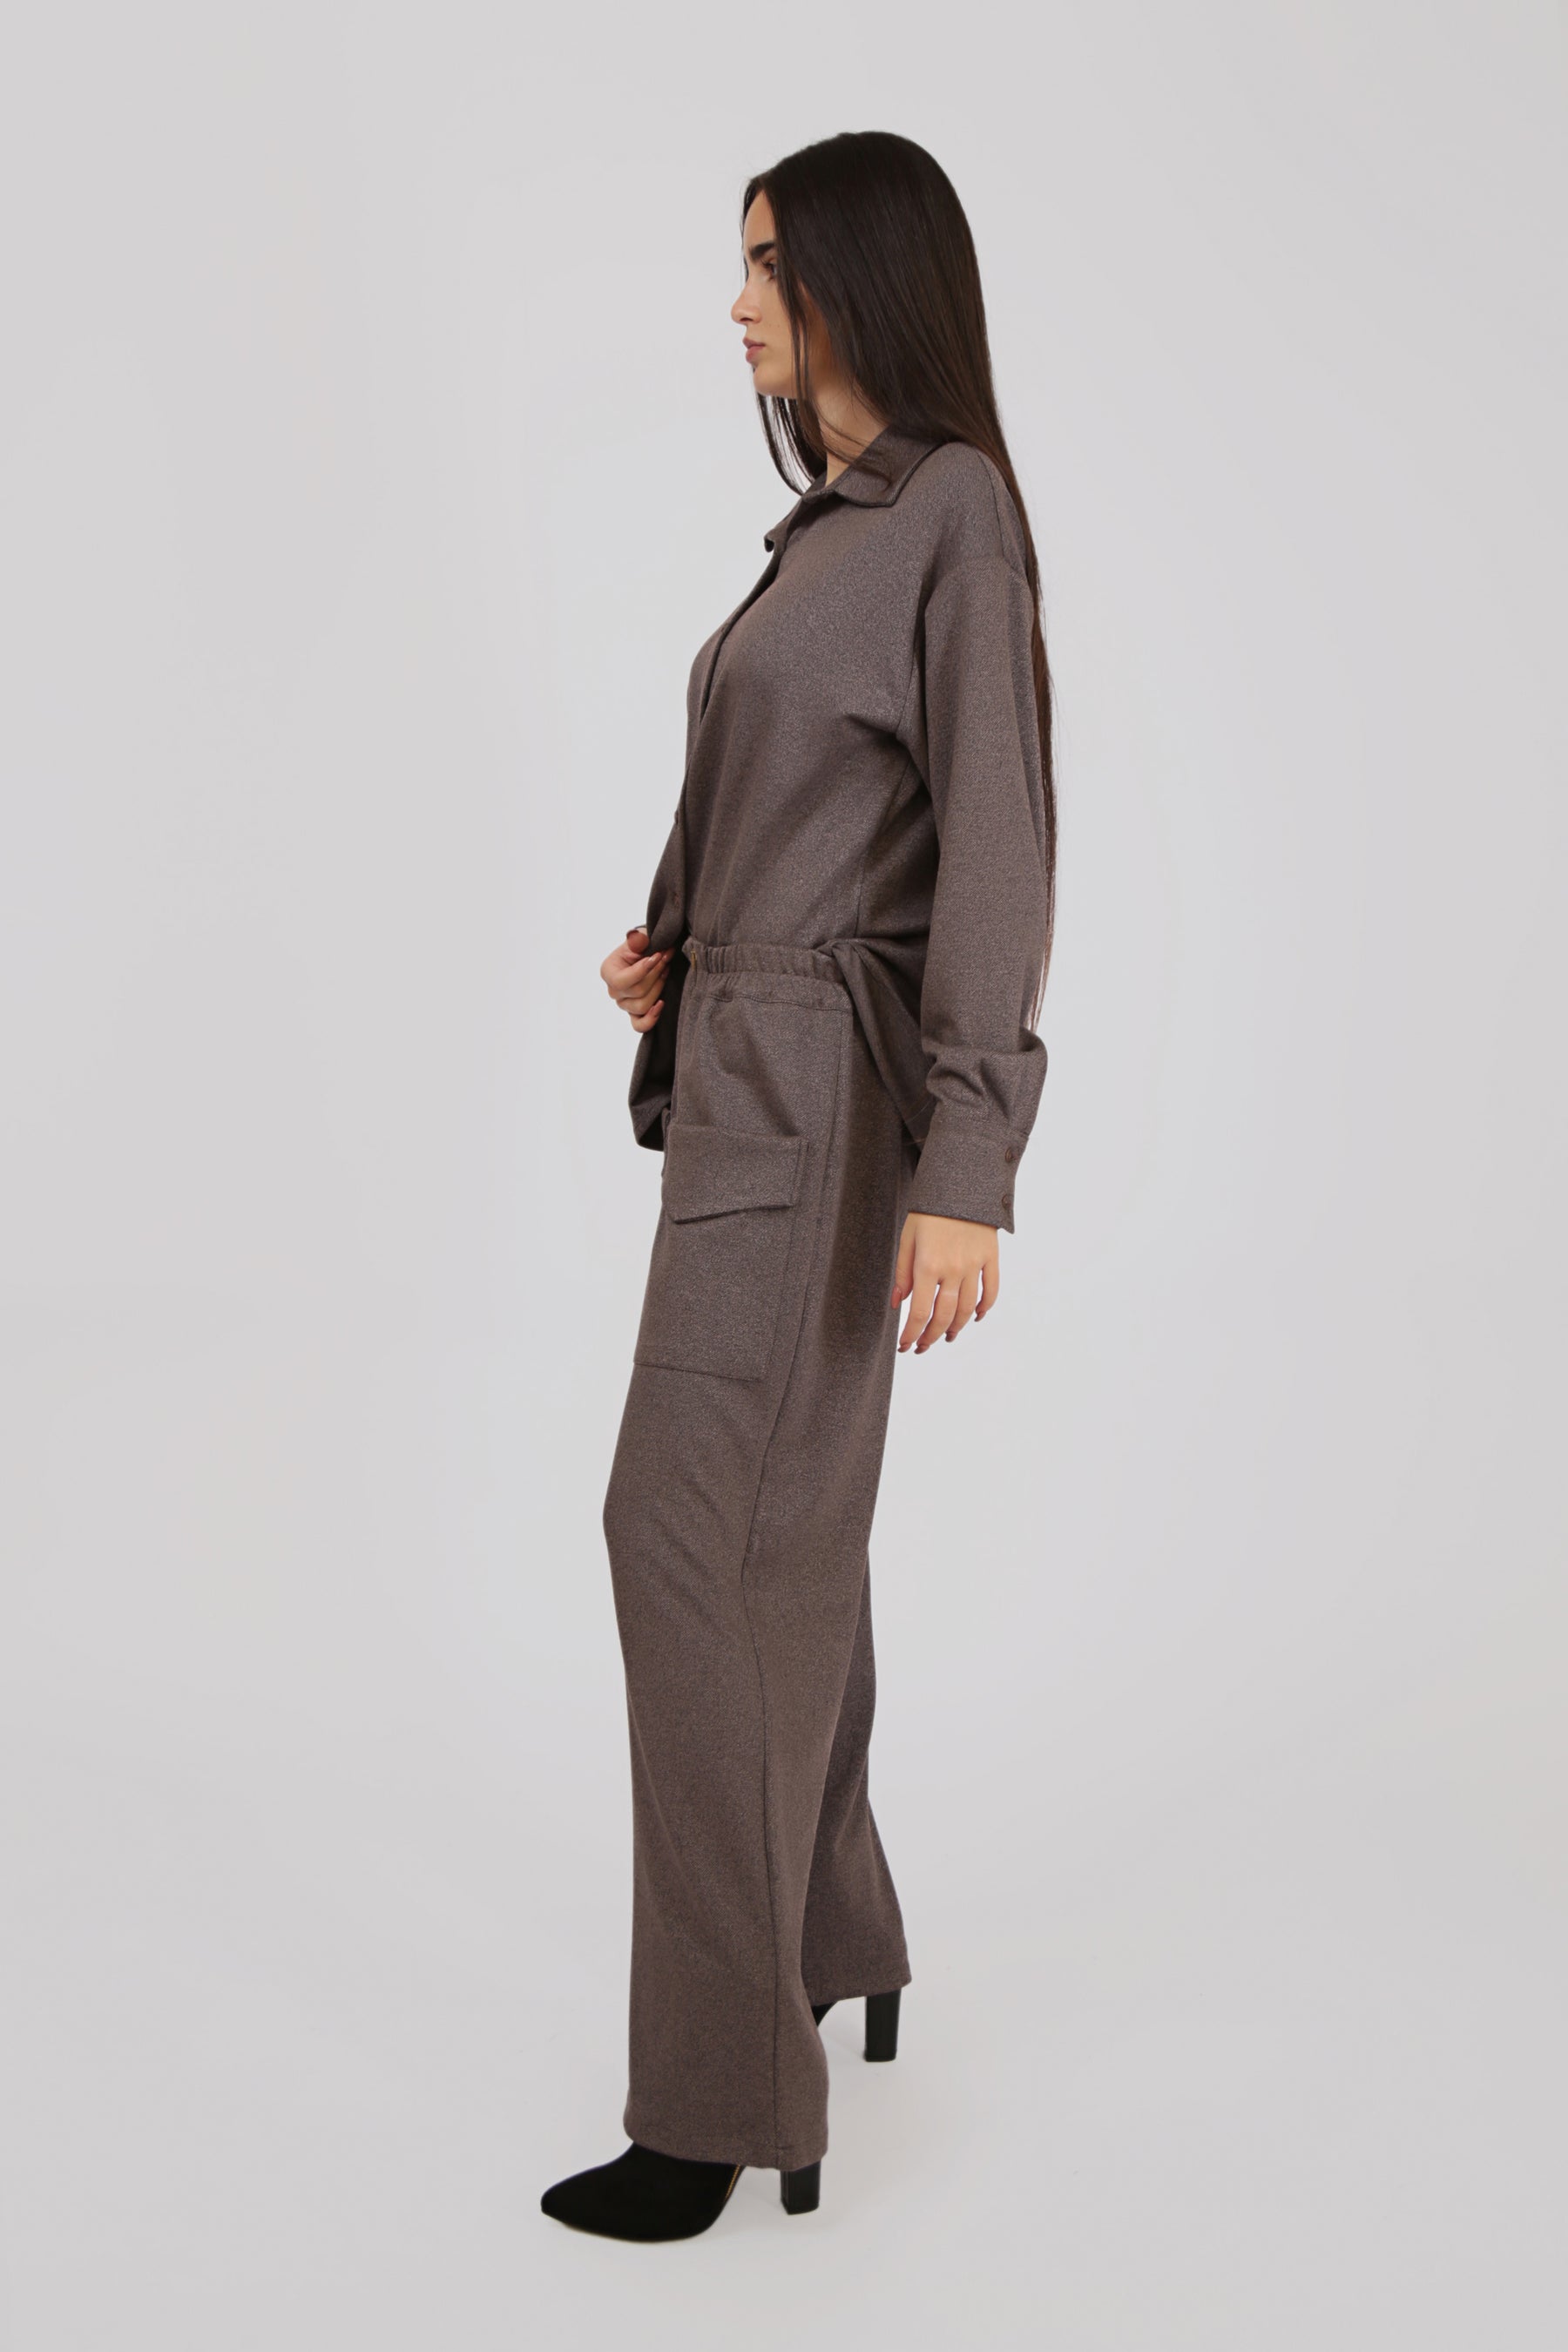 Textured Shirt and Pants with Frontal Pockets